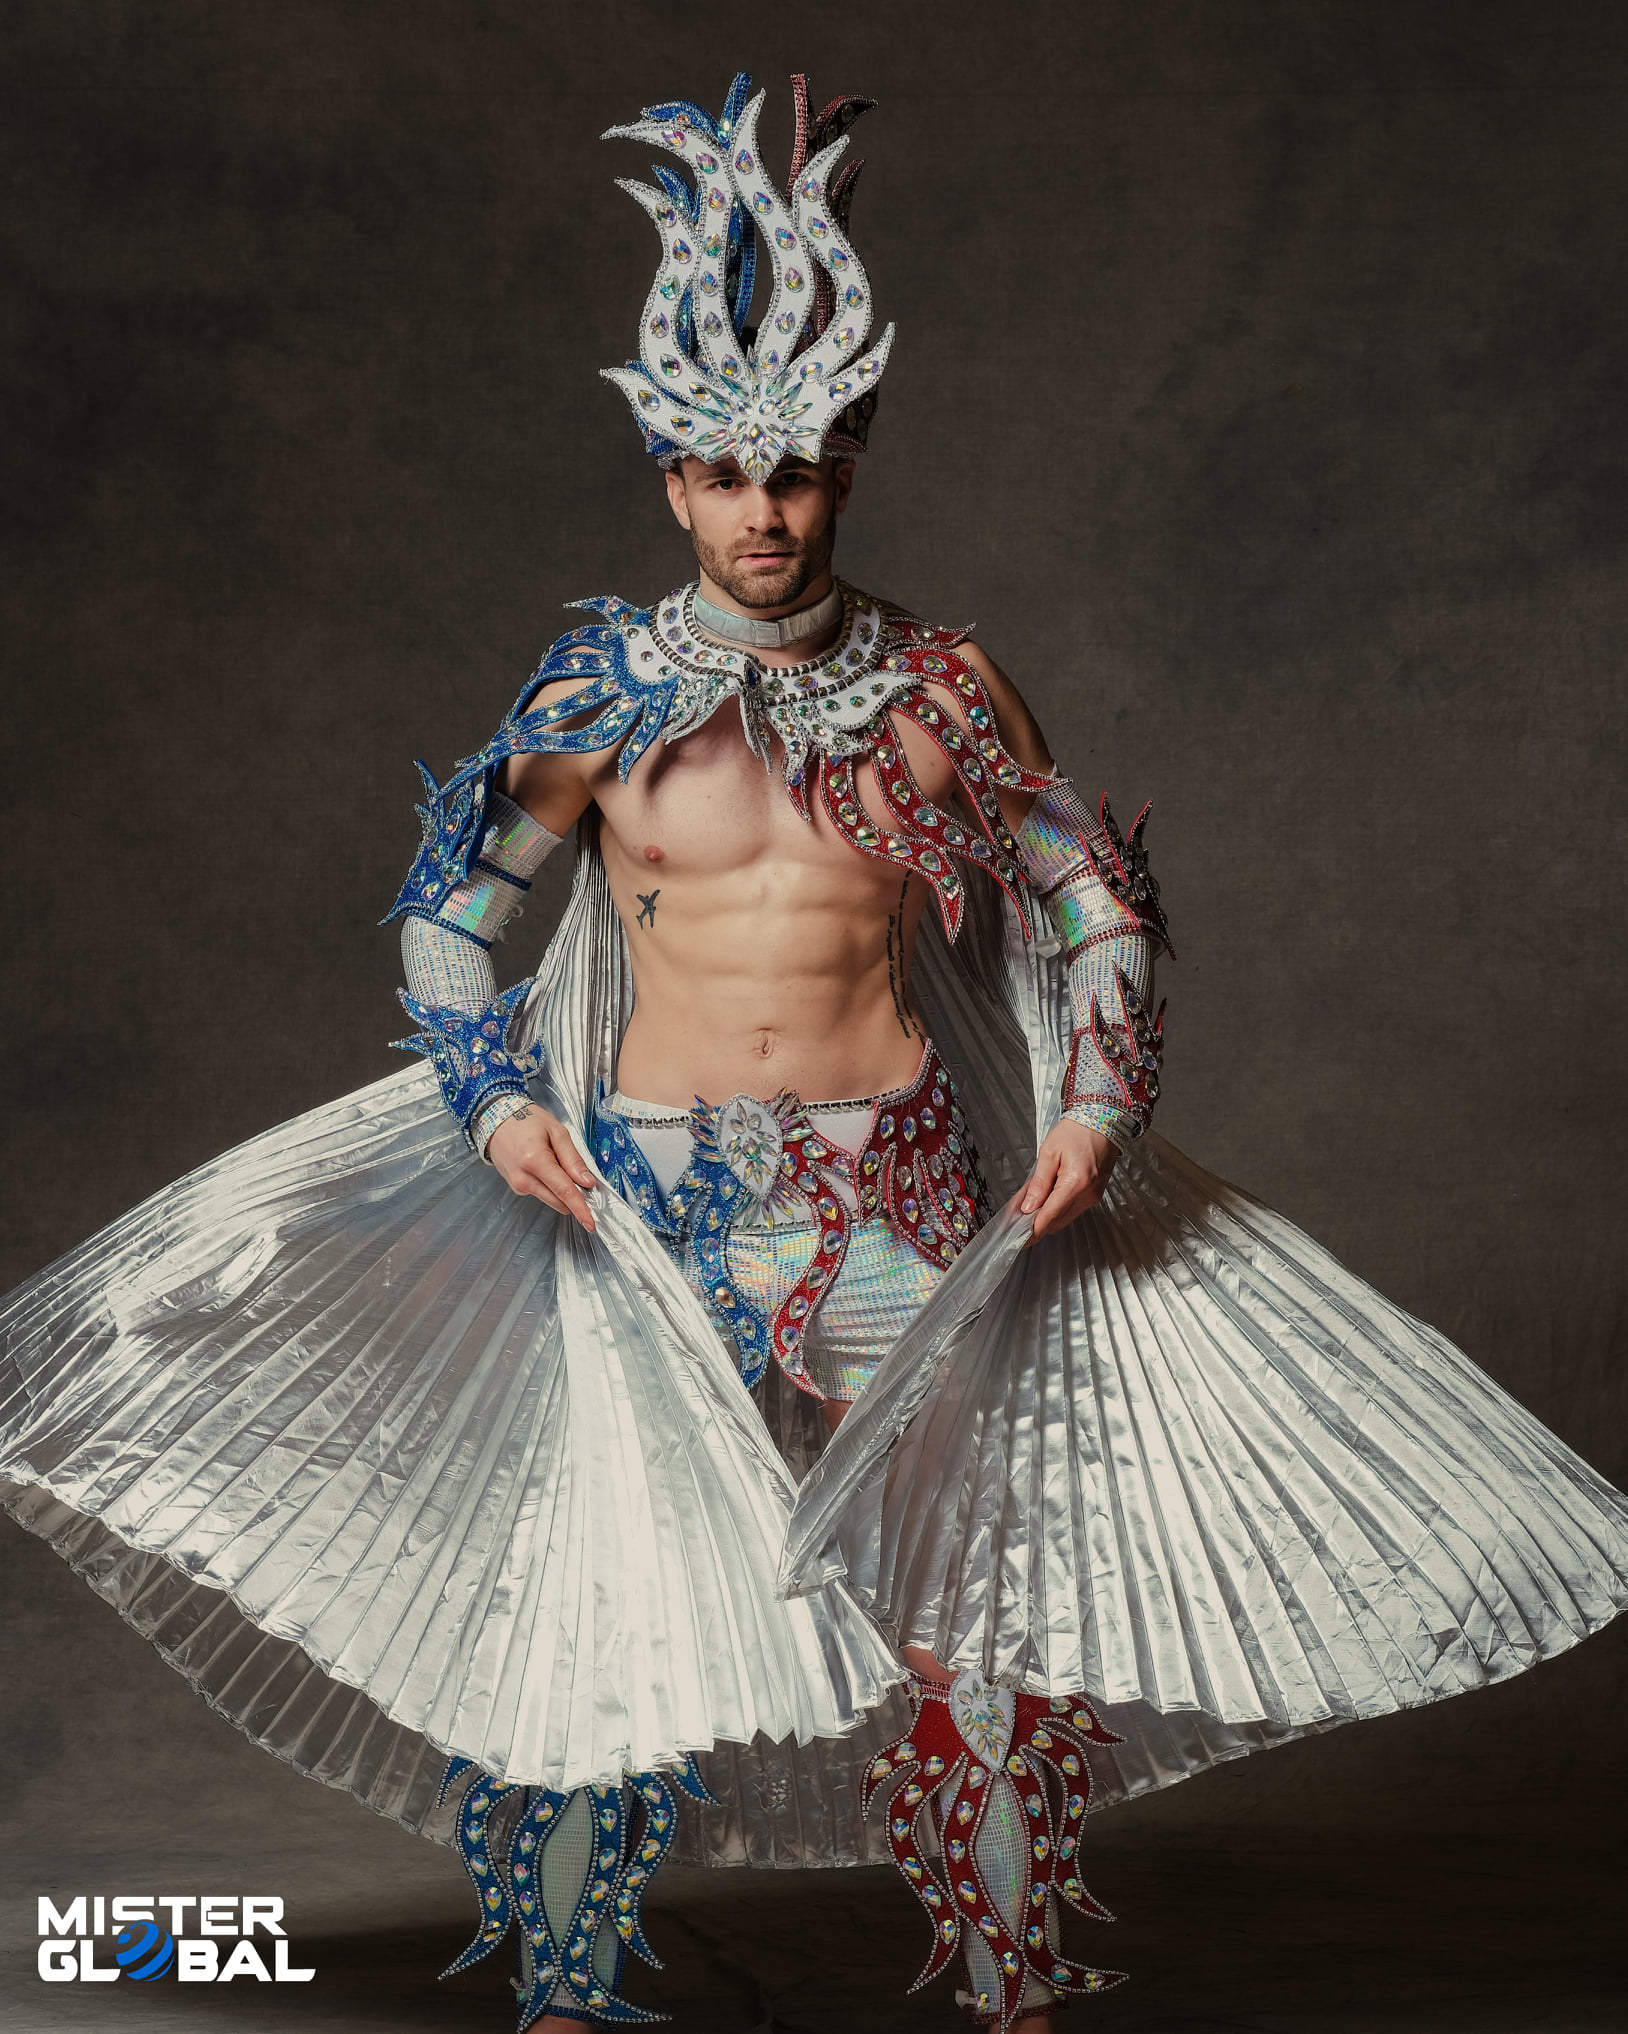 Man with dramatic headdress and chest-baring costume with flowing, accordion flaps